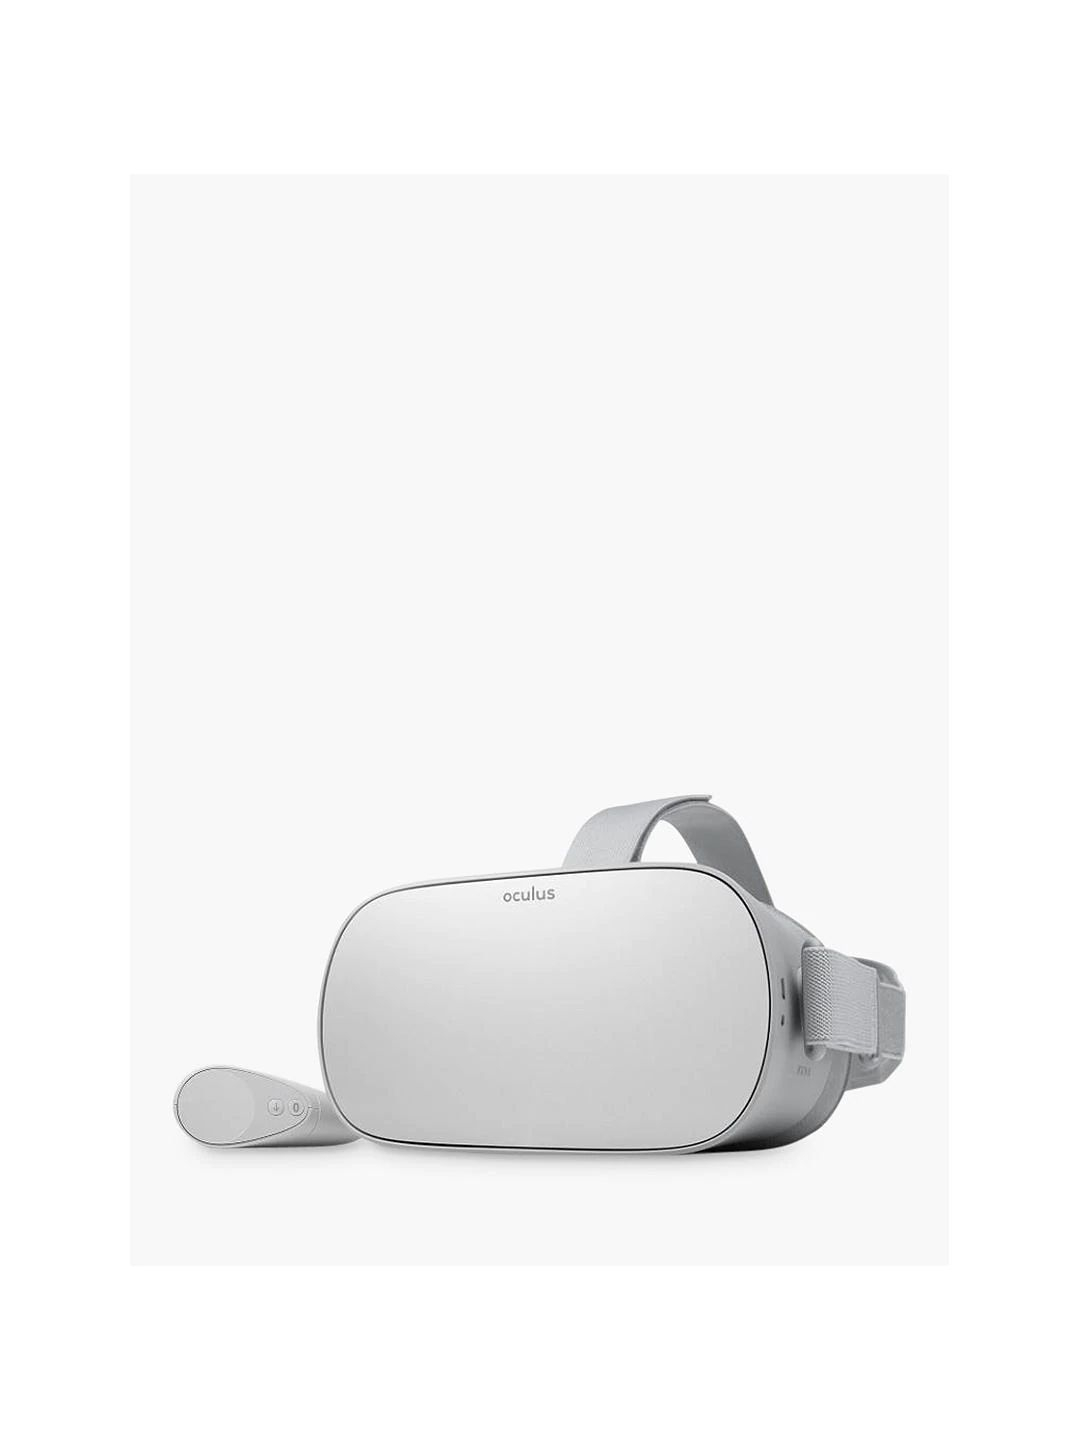 oculus go steaming up